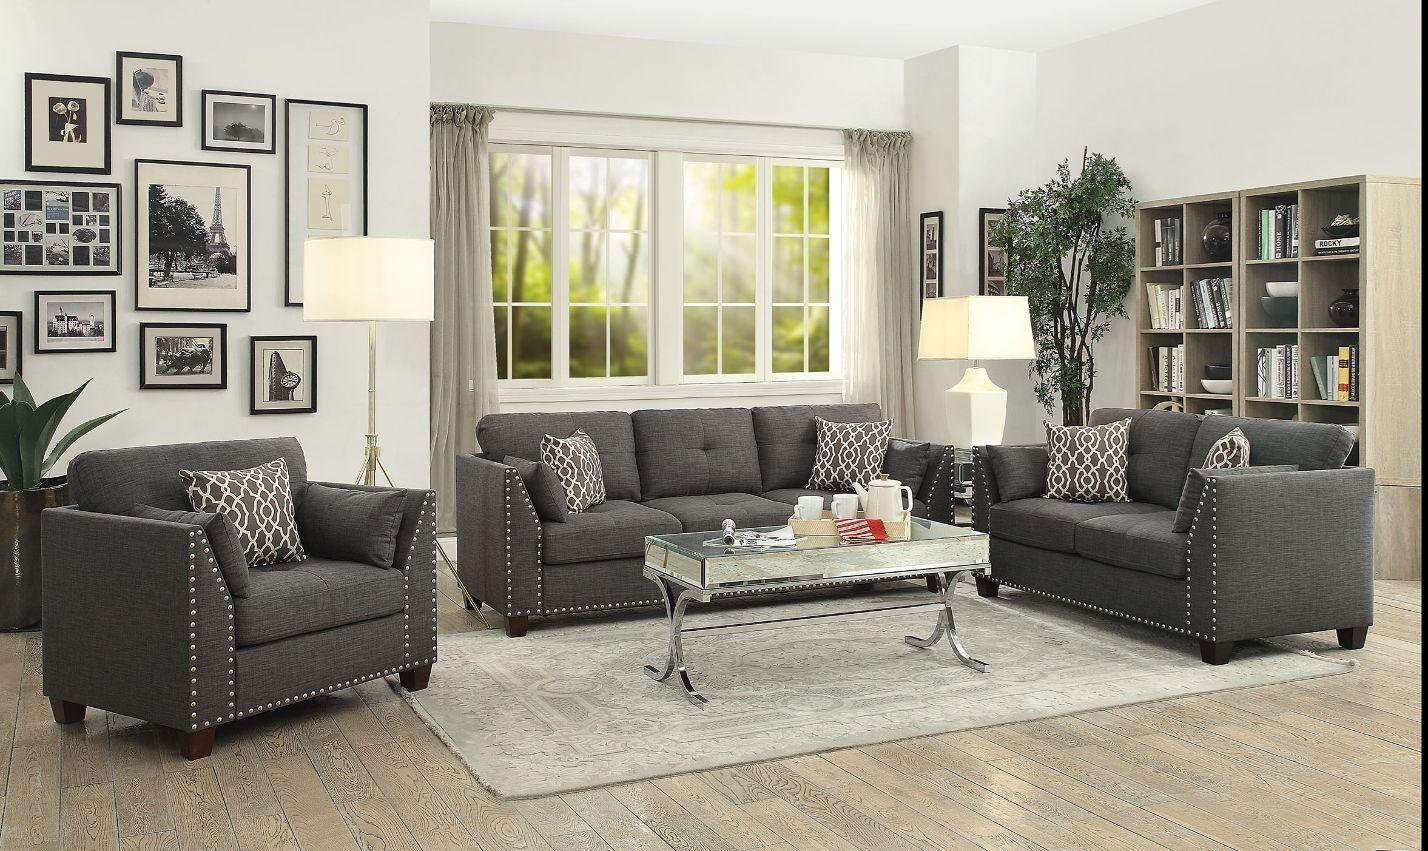 Contemporary, Classic, Simple Sofa Loveseat Chair and Coffee Table Laurissa 52405-4pcs in Charcoal Linen